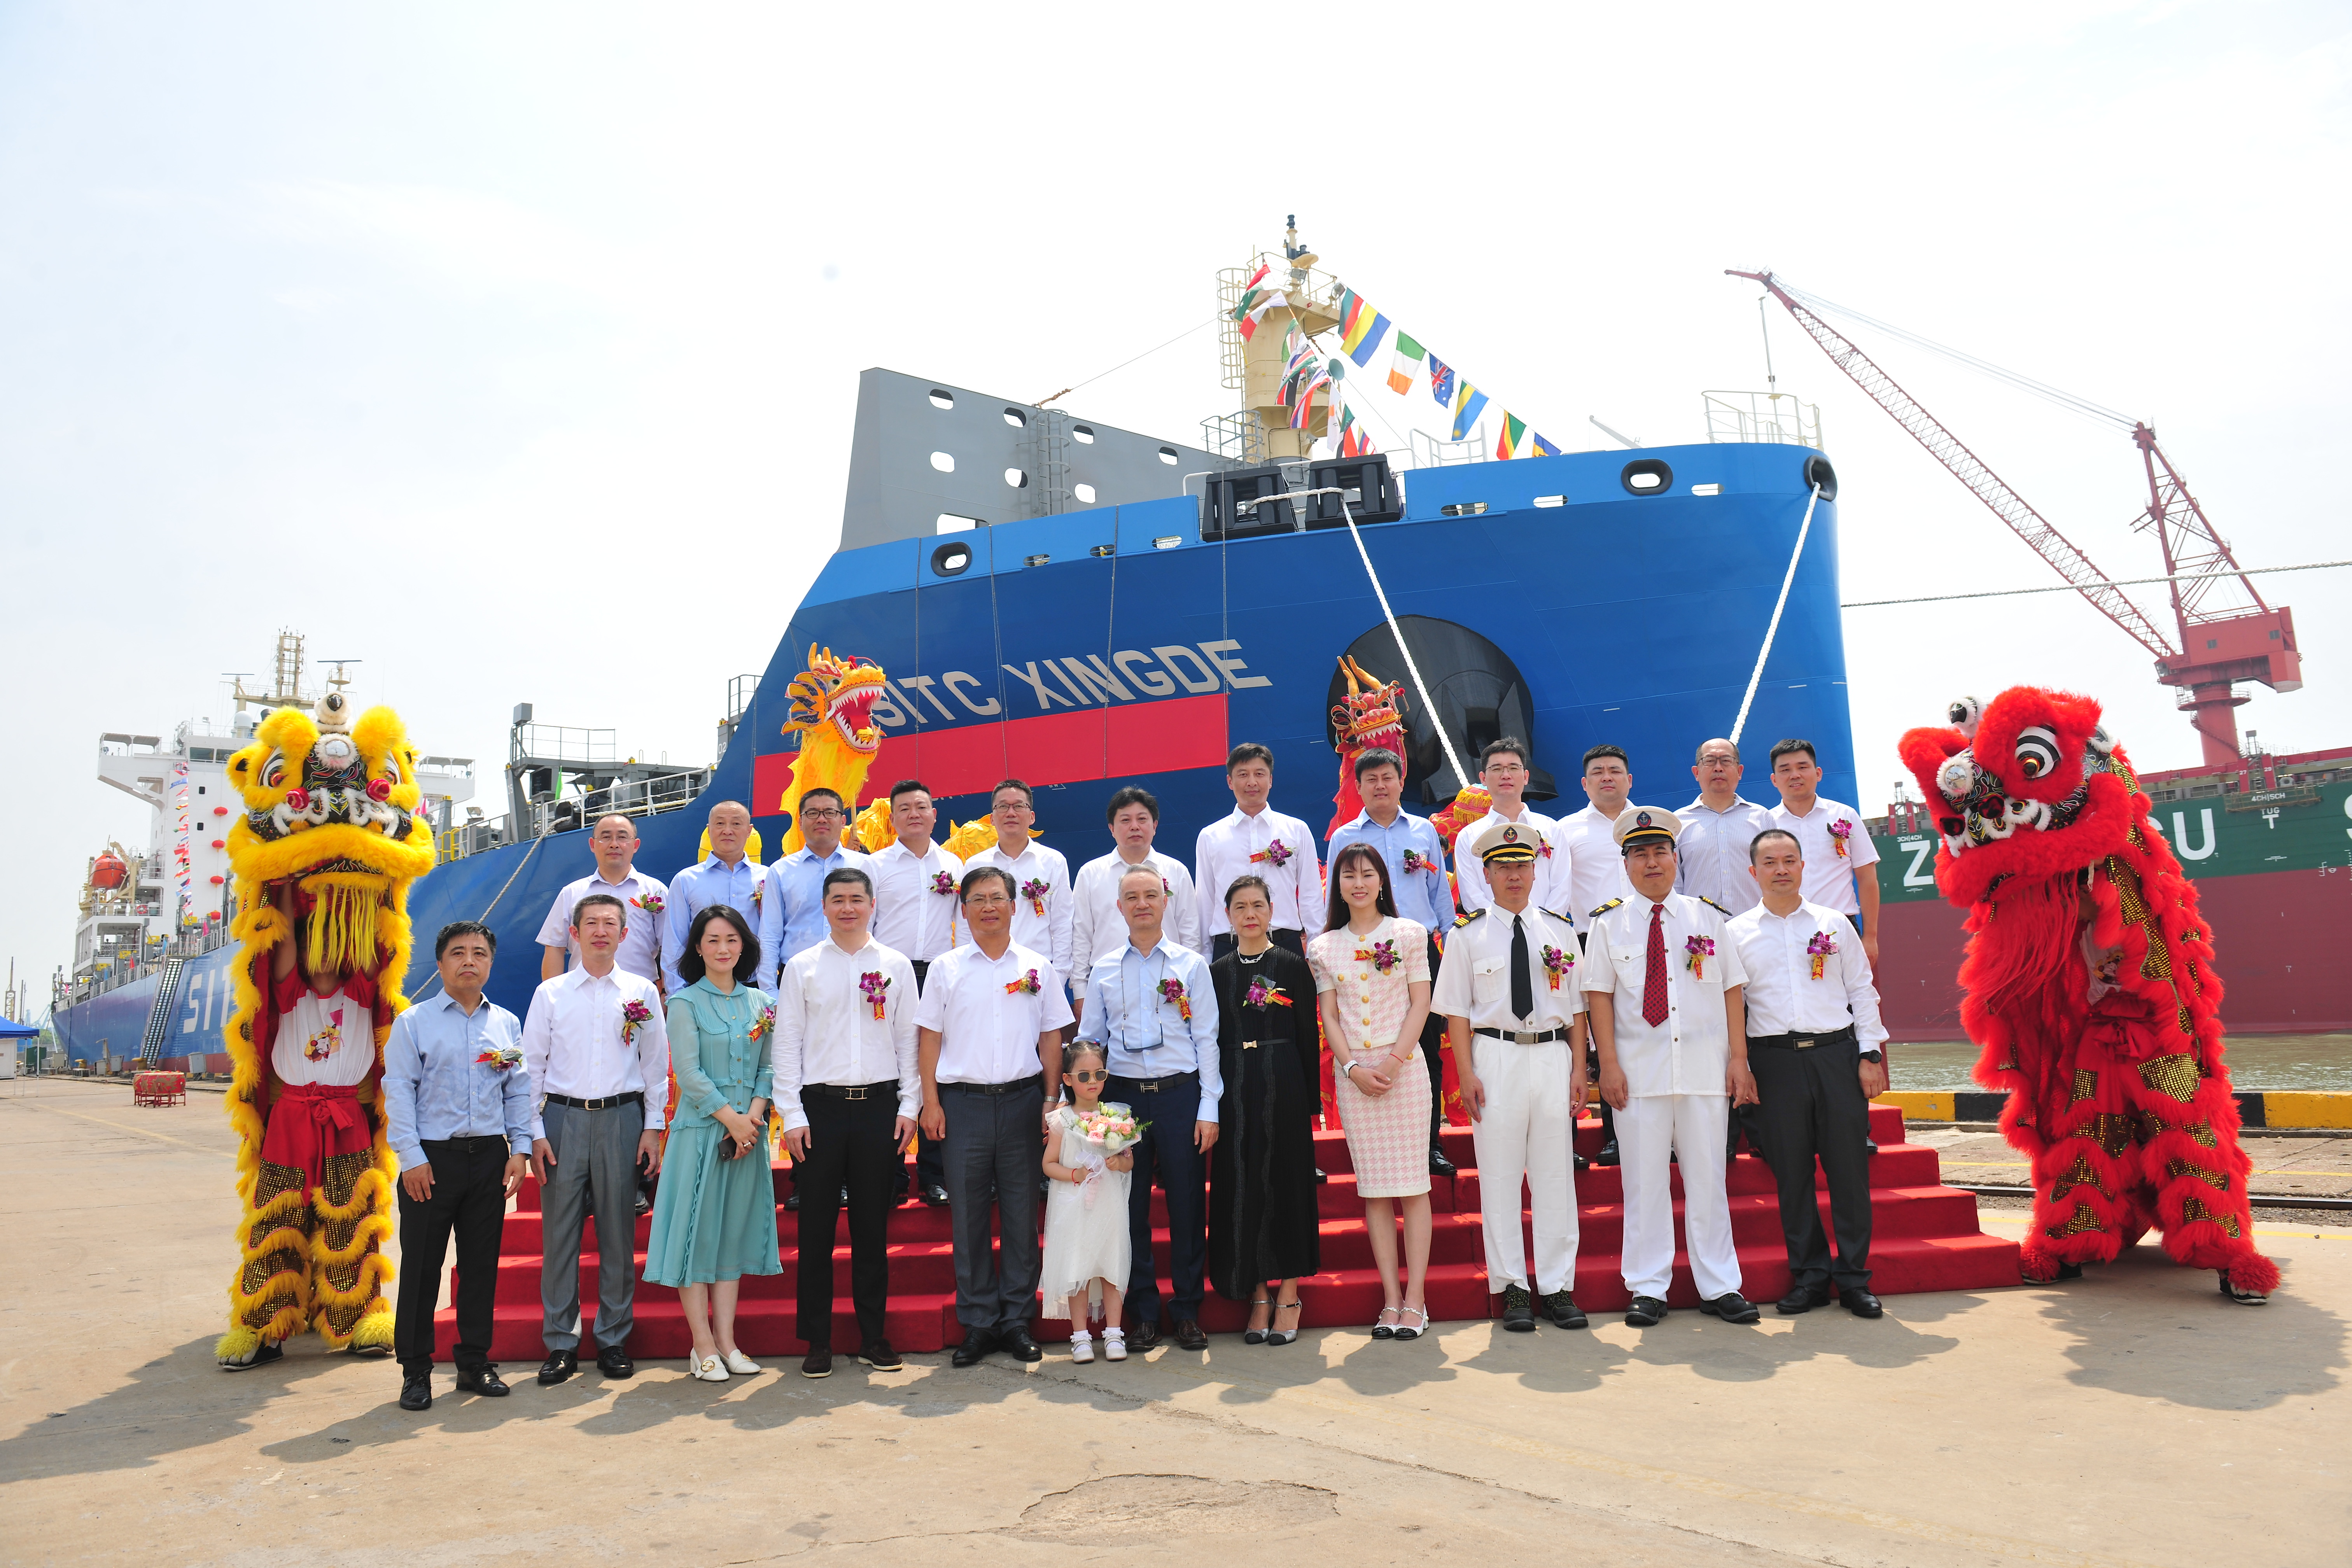 Naming Ceremony for M/V “SITC XINGDE”And “SITC WENDE”hold successfully